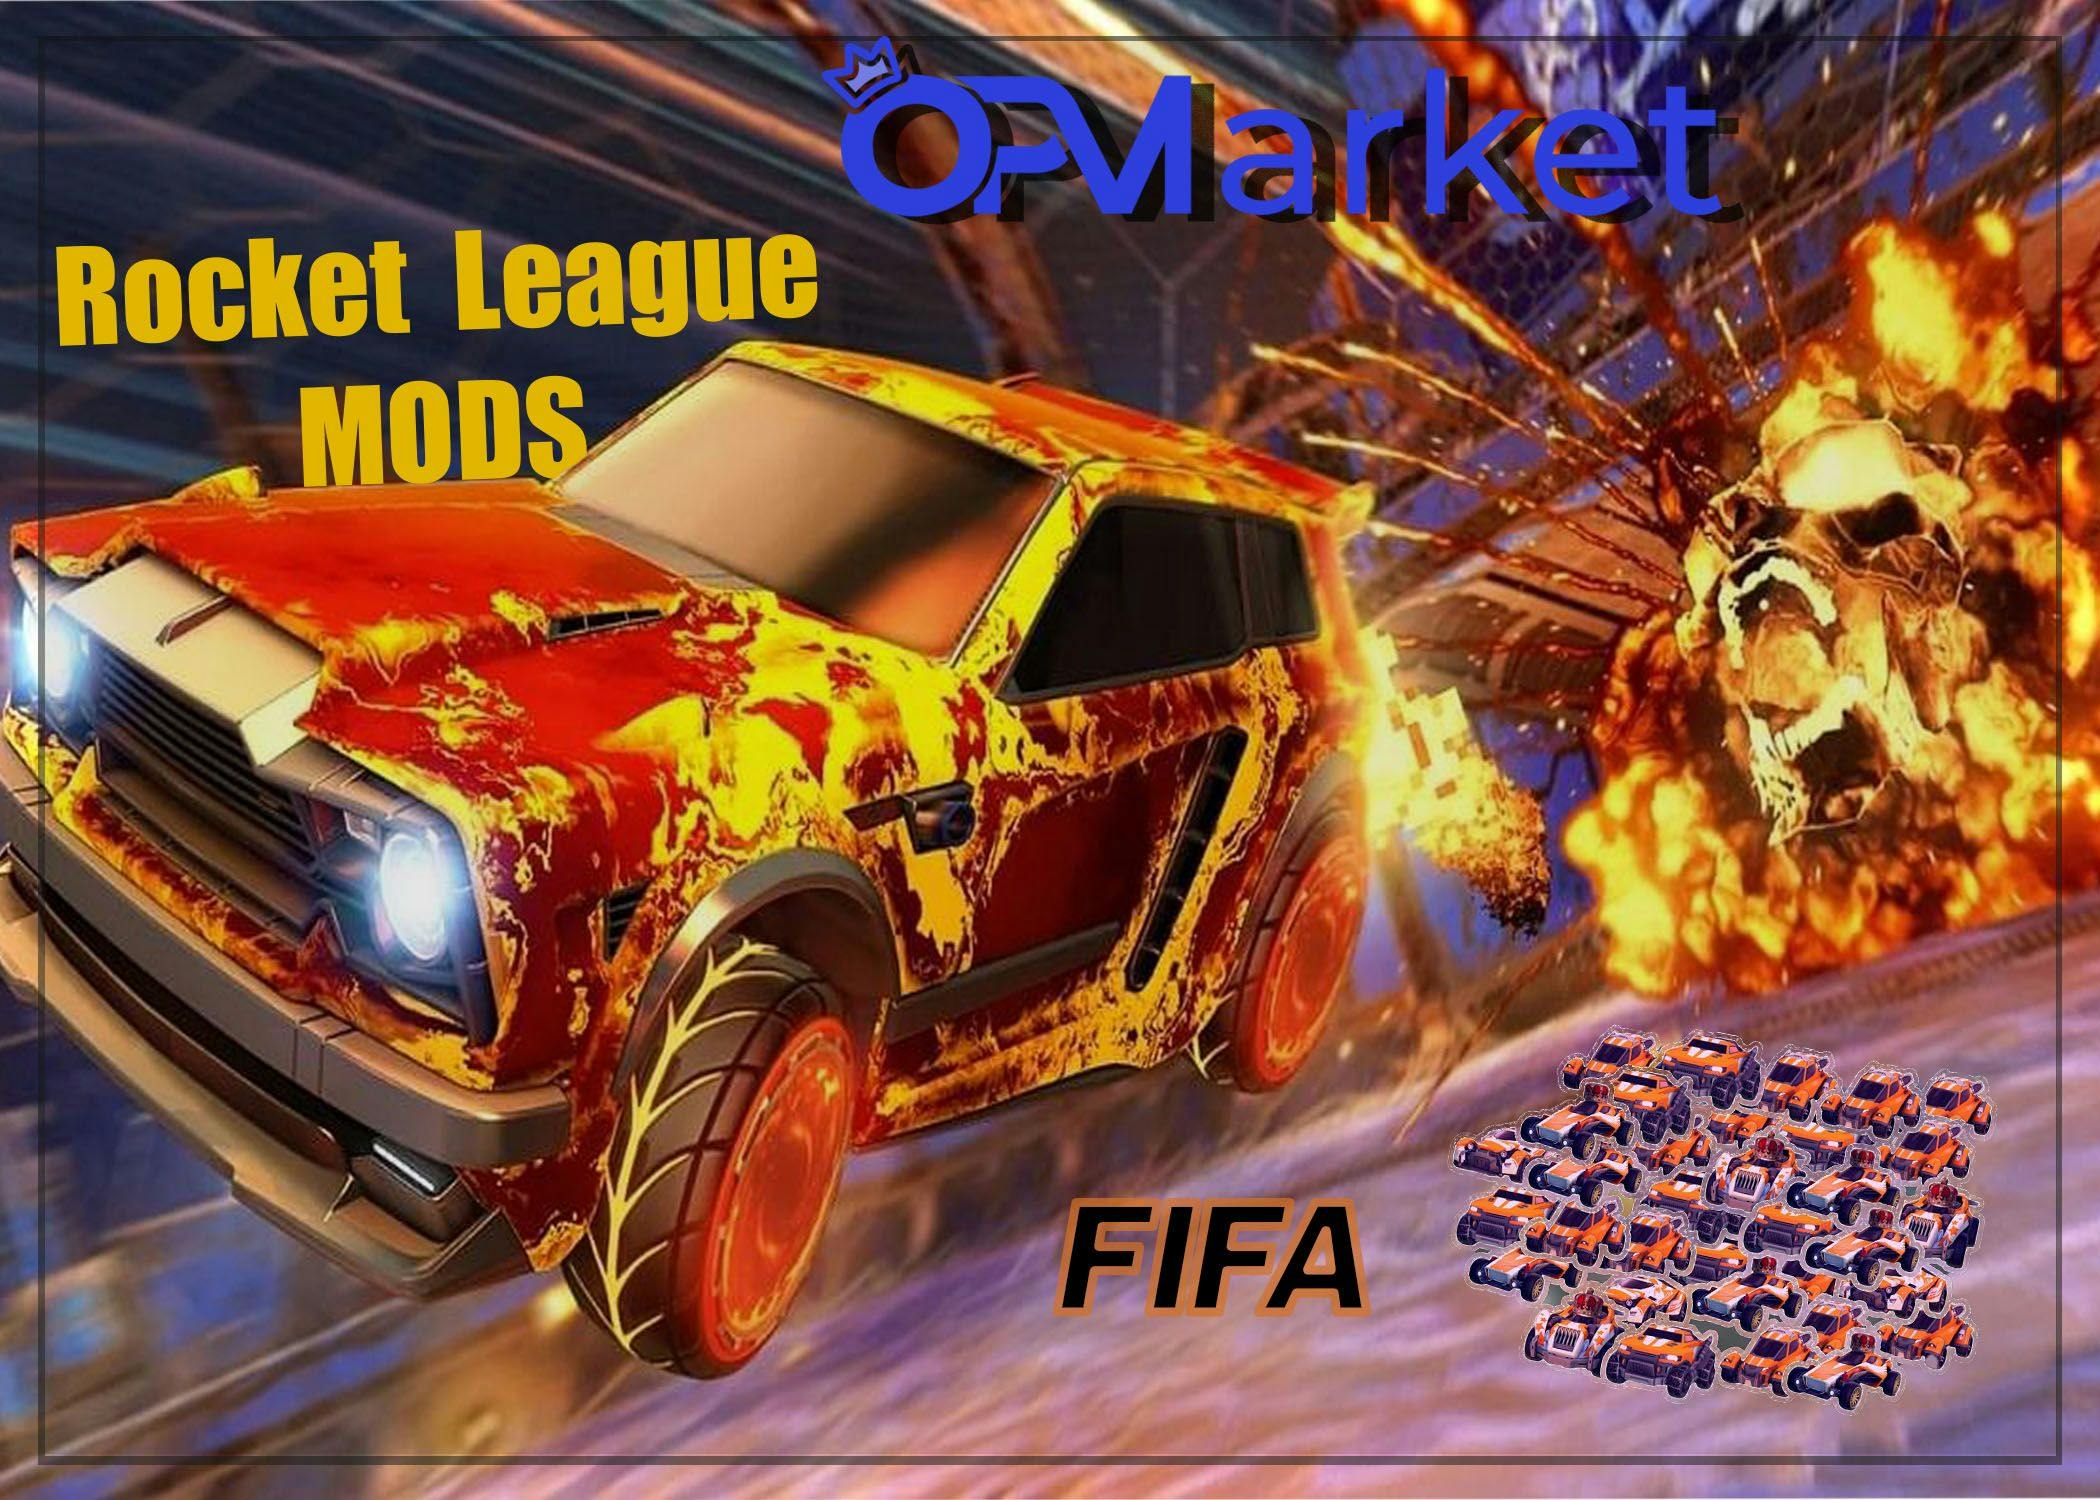 Rocket League Mods: Enhance Your Gaming Experience with These Incredible Mods